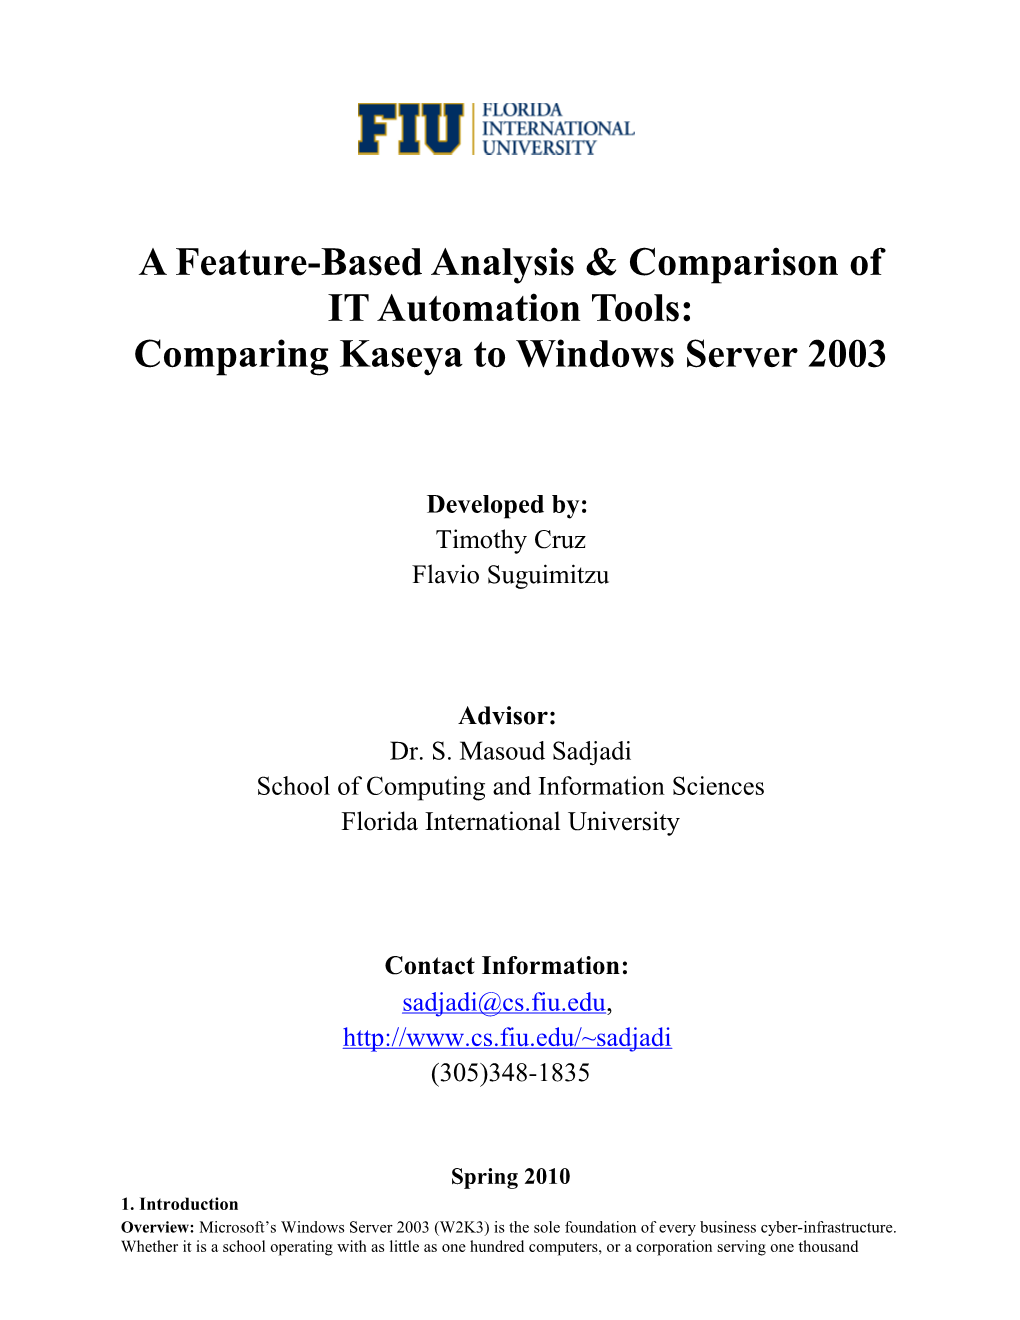 Comparing Kaseya To <Your Tool>